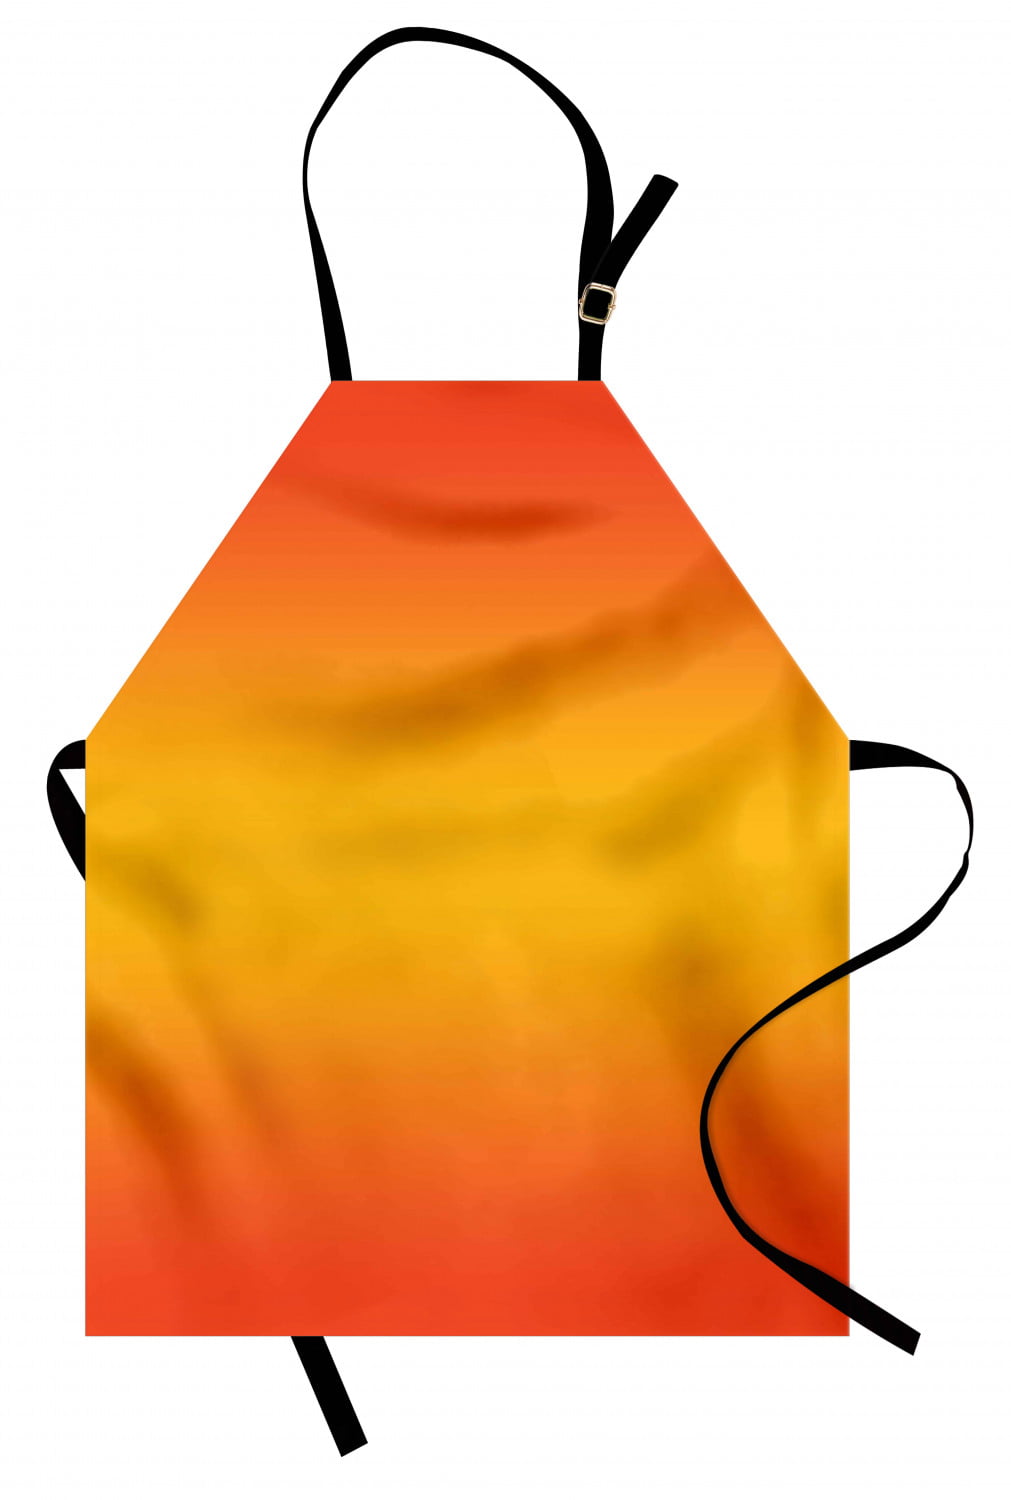 City Chicago Skyline Sunset River Kitchen Apron for Baking/BBQ Men Women Unisex Waterproof 31X27 Inches SSOIU Chicago Cooking Apron 